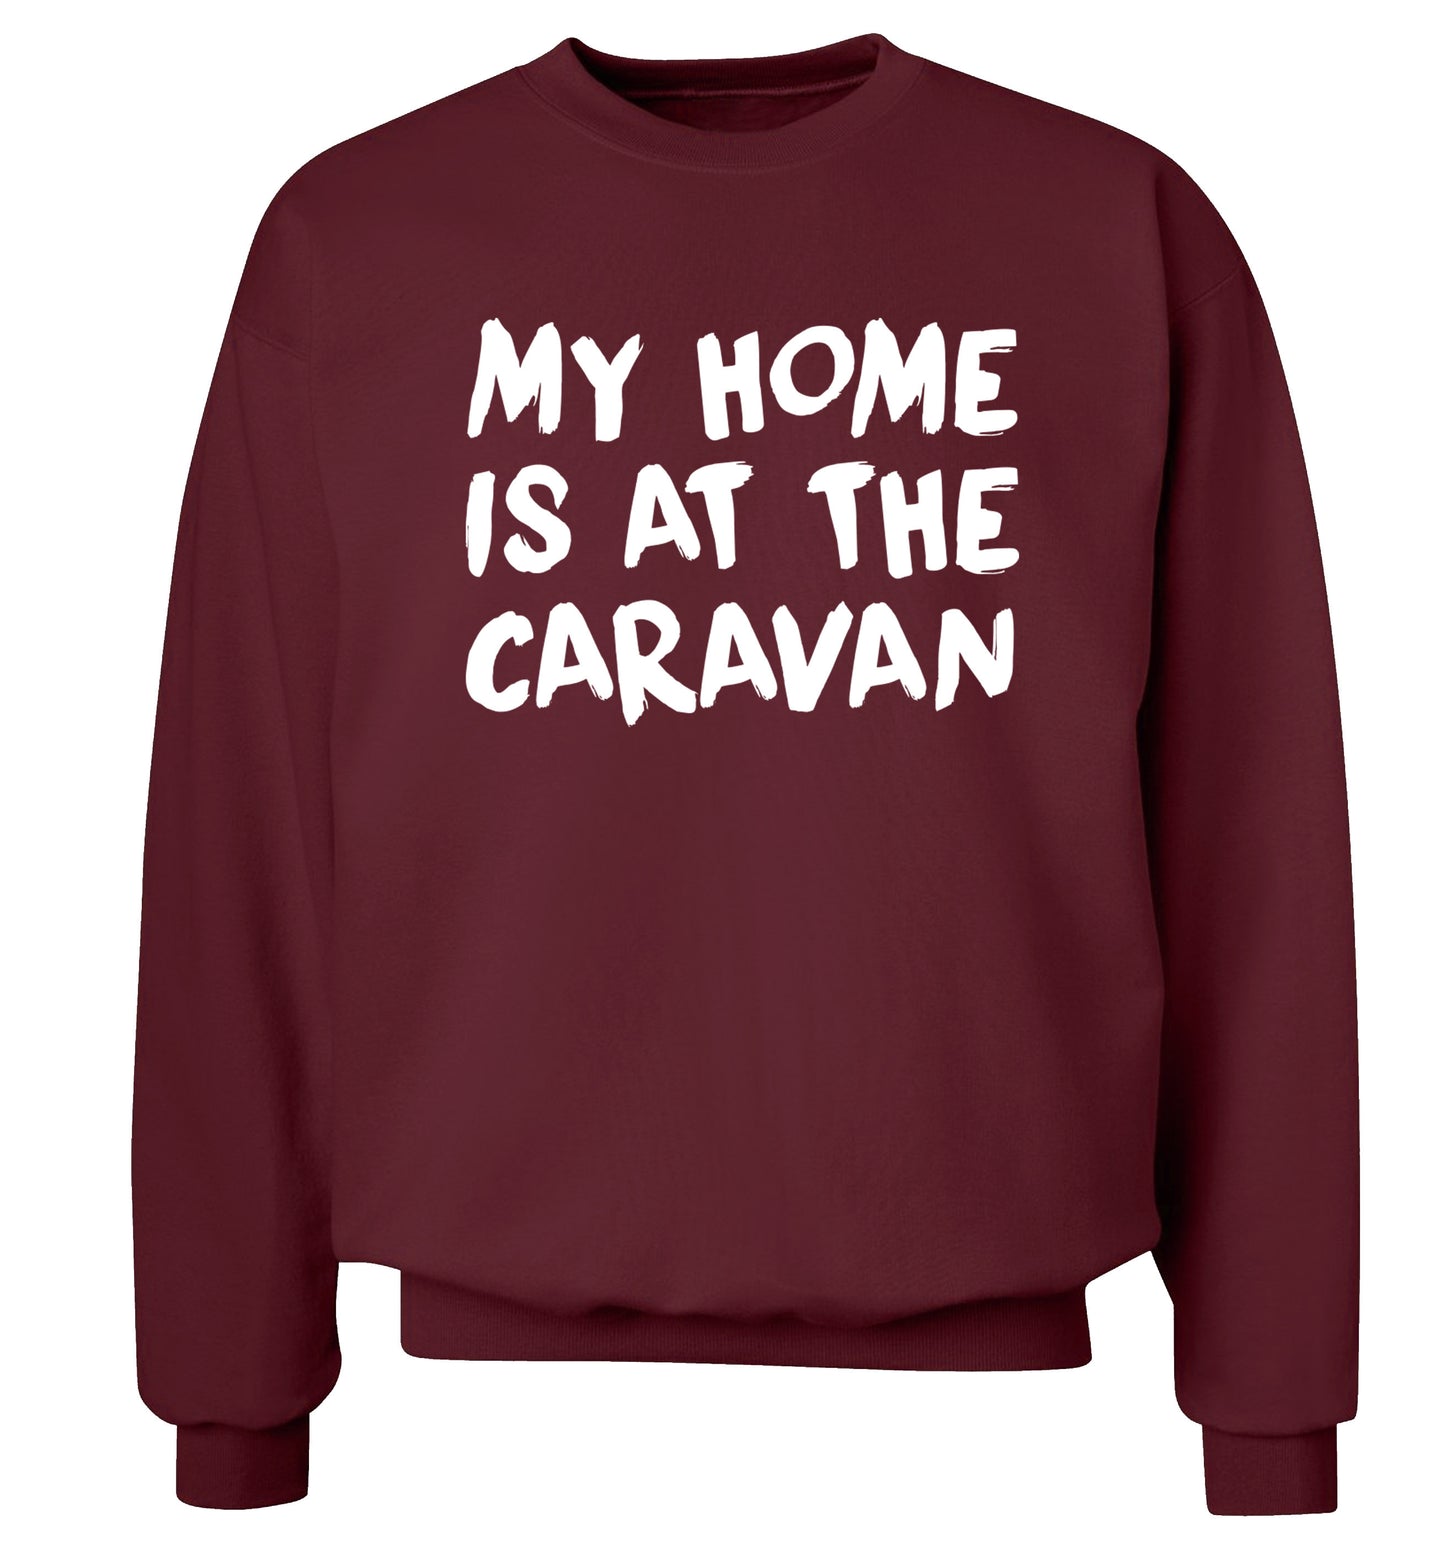 My home is at the caravan Adult's unisex maroon Sweater 2XL